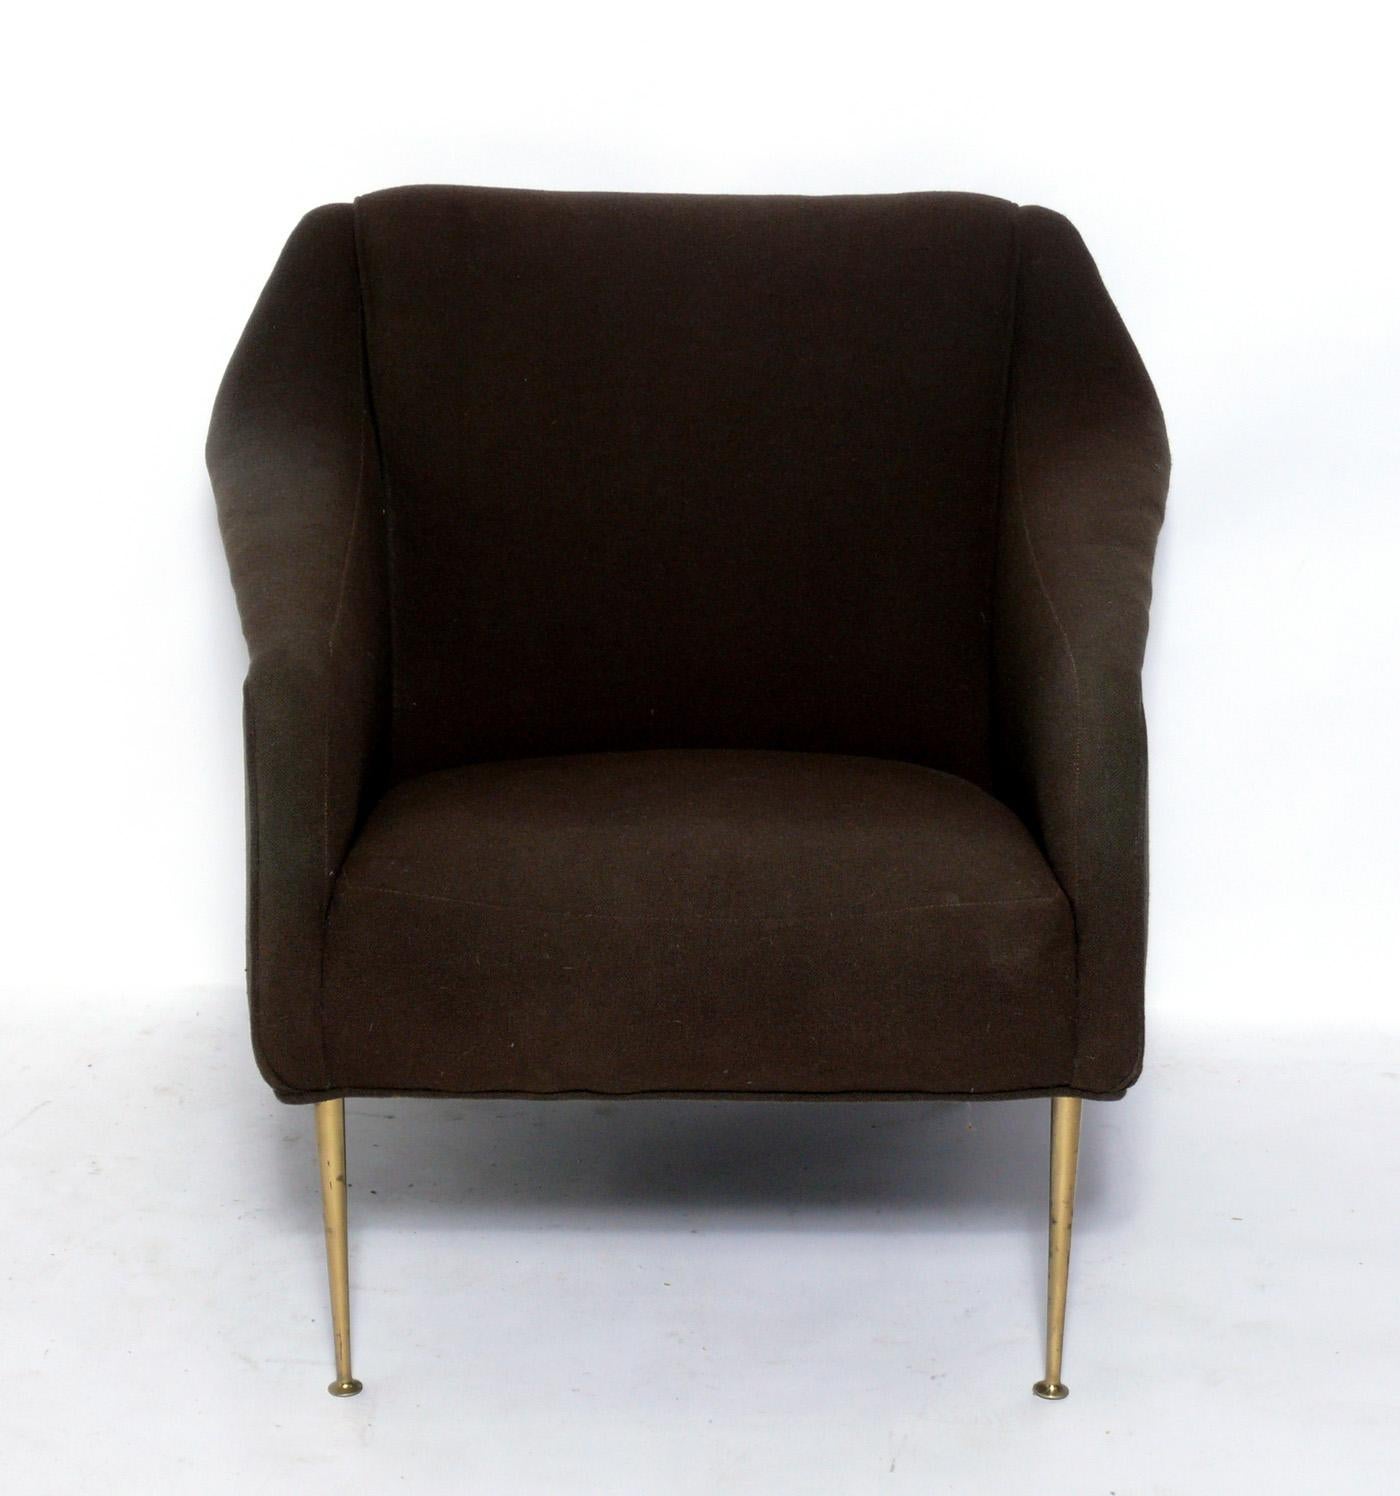 Elegant Mid-Century Modern lounge chair, designed by Carlo de Carli, Italian, for Singer and Sons, American, circa 1950s. It retains it's original upholstery, which is in decent condition if you like vintage fabric. However, we recommend